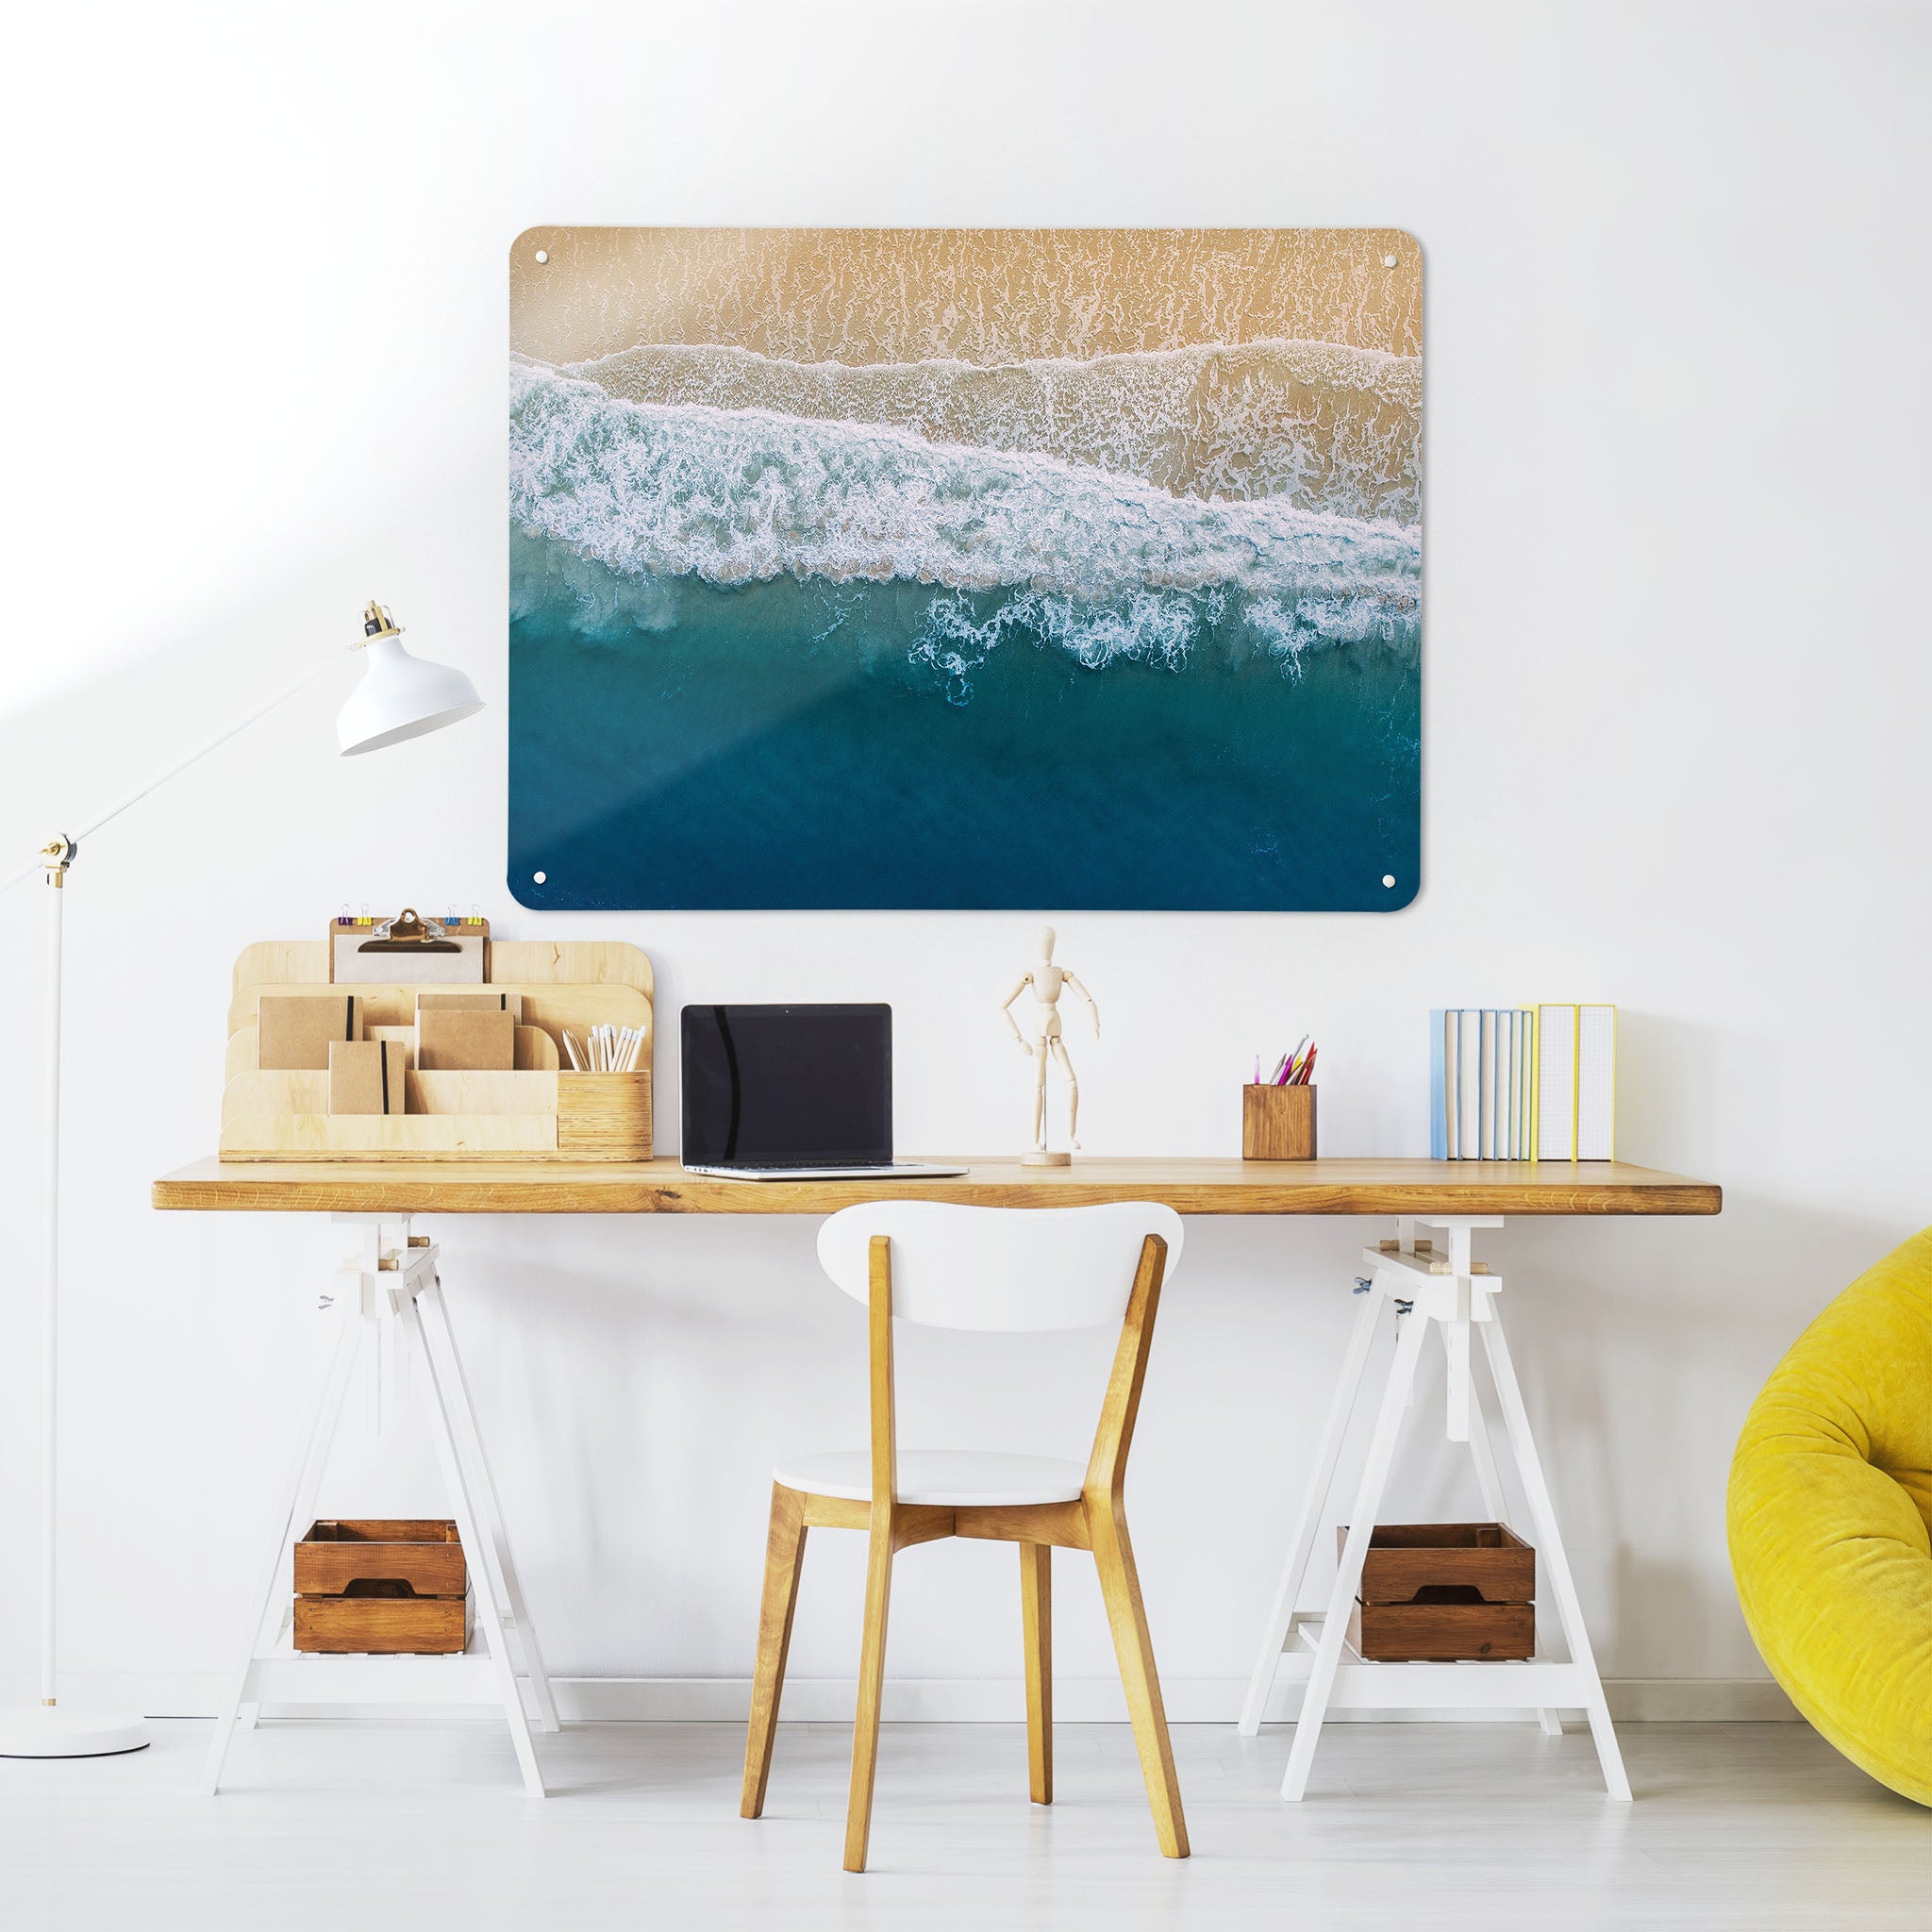 A desk in a workspace setting in a white interior with a magnetic metal wall art panel showing a photograph of wave breaking on a sandy beach